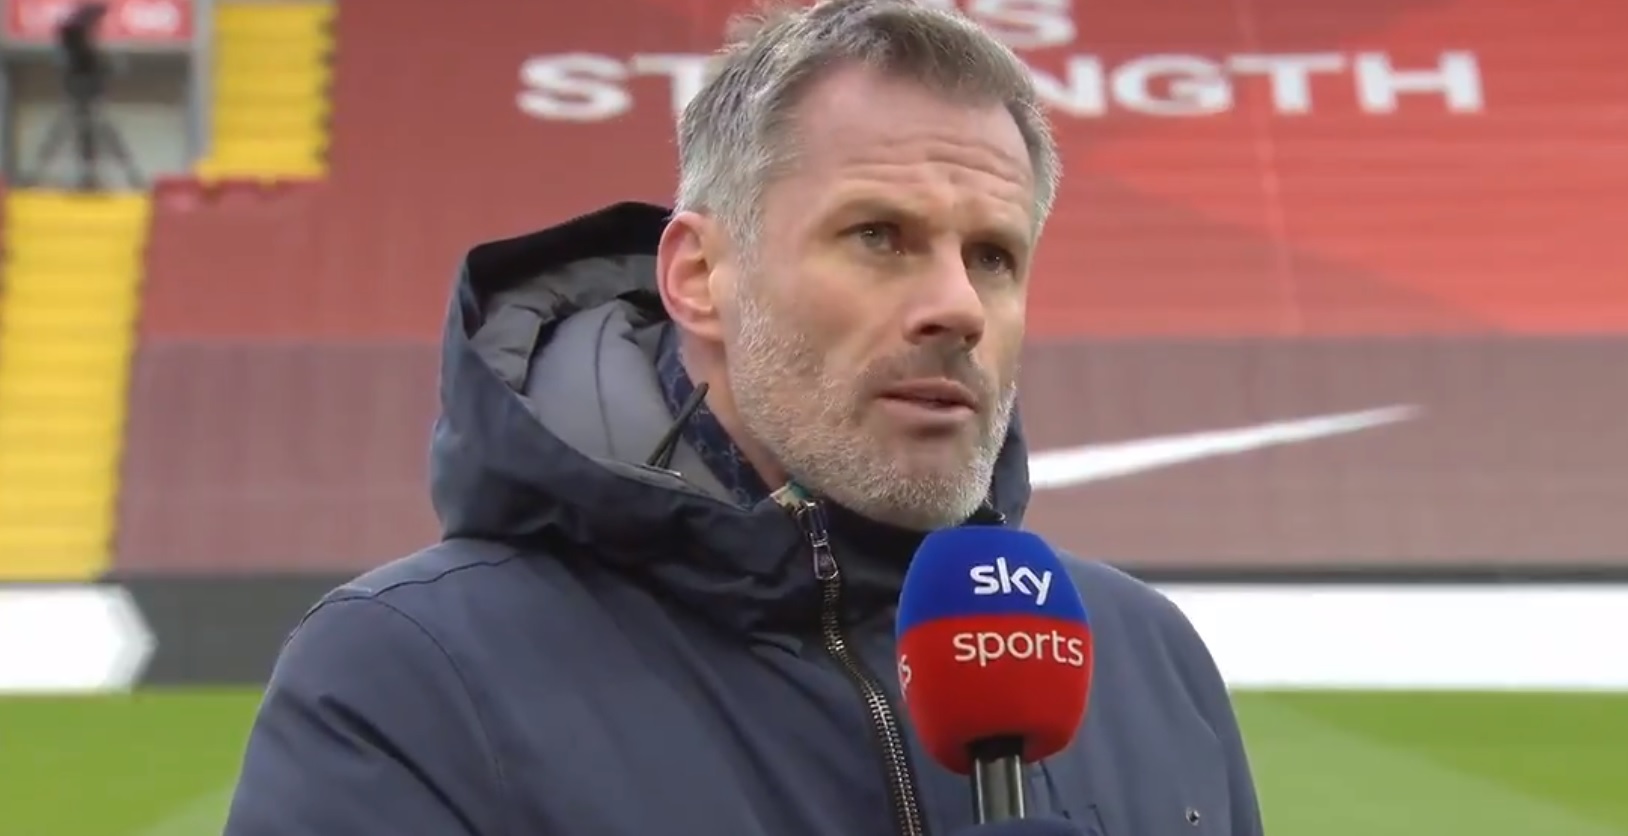 Jamie Carragher names the current Liverpool star he believes will make a good pundit in the future